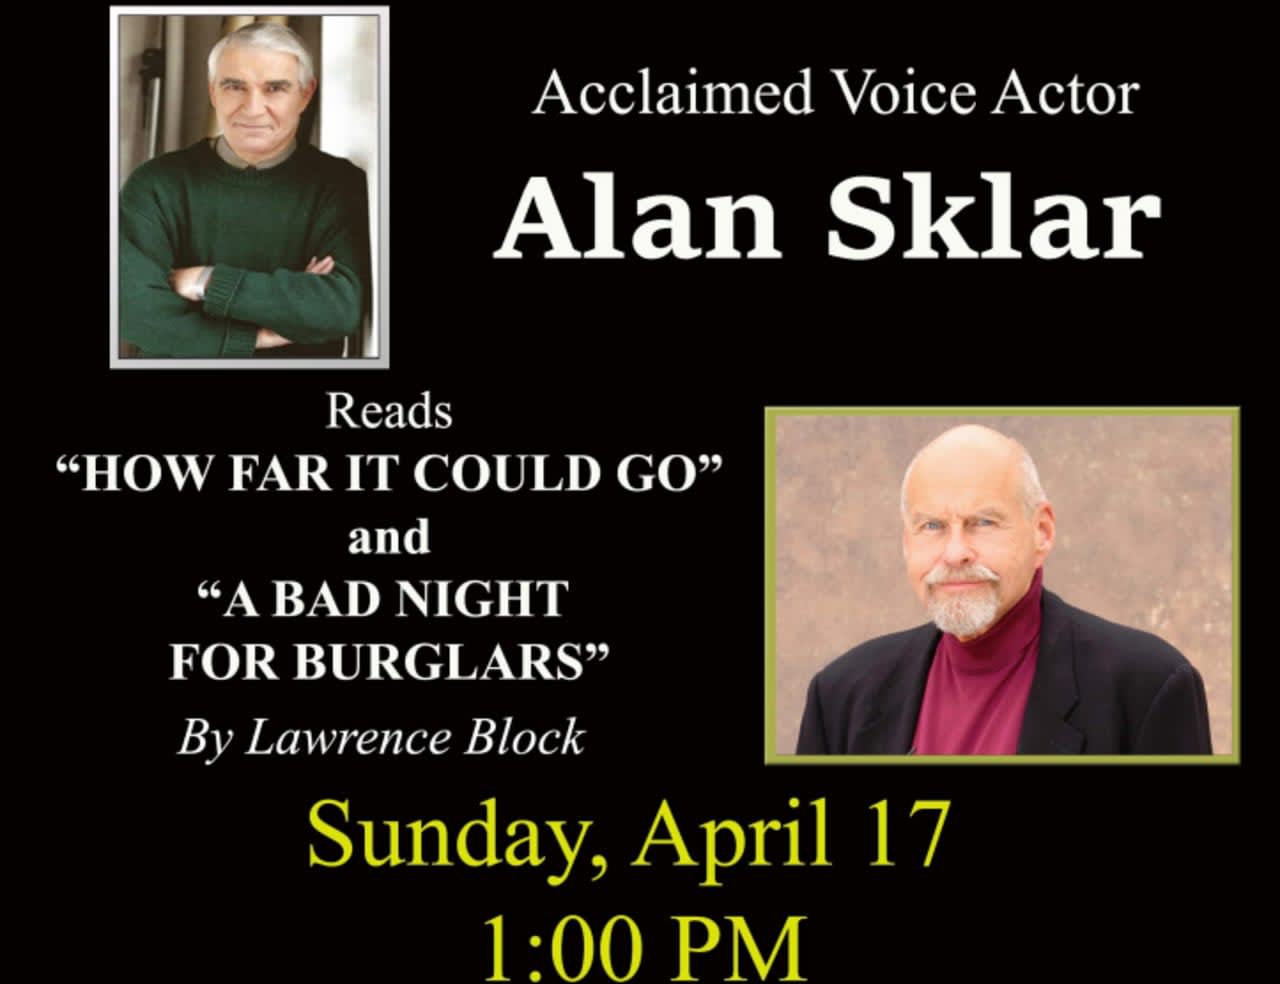 Voice actor Alan Sklar will visit the North Castle Public Library.